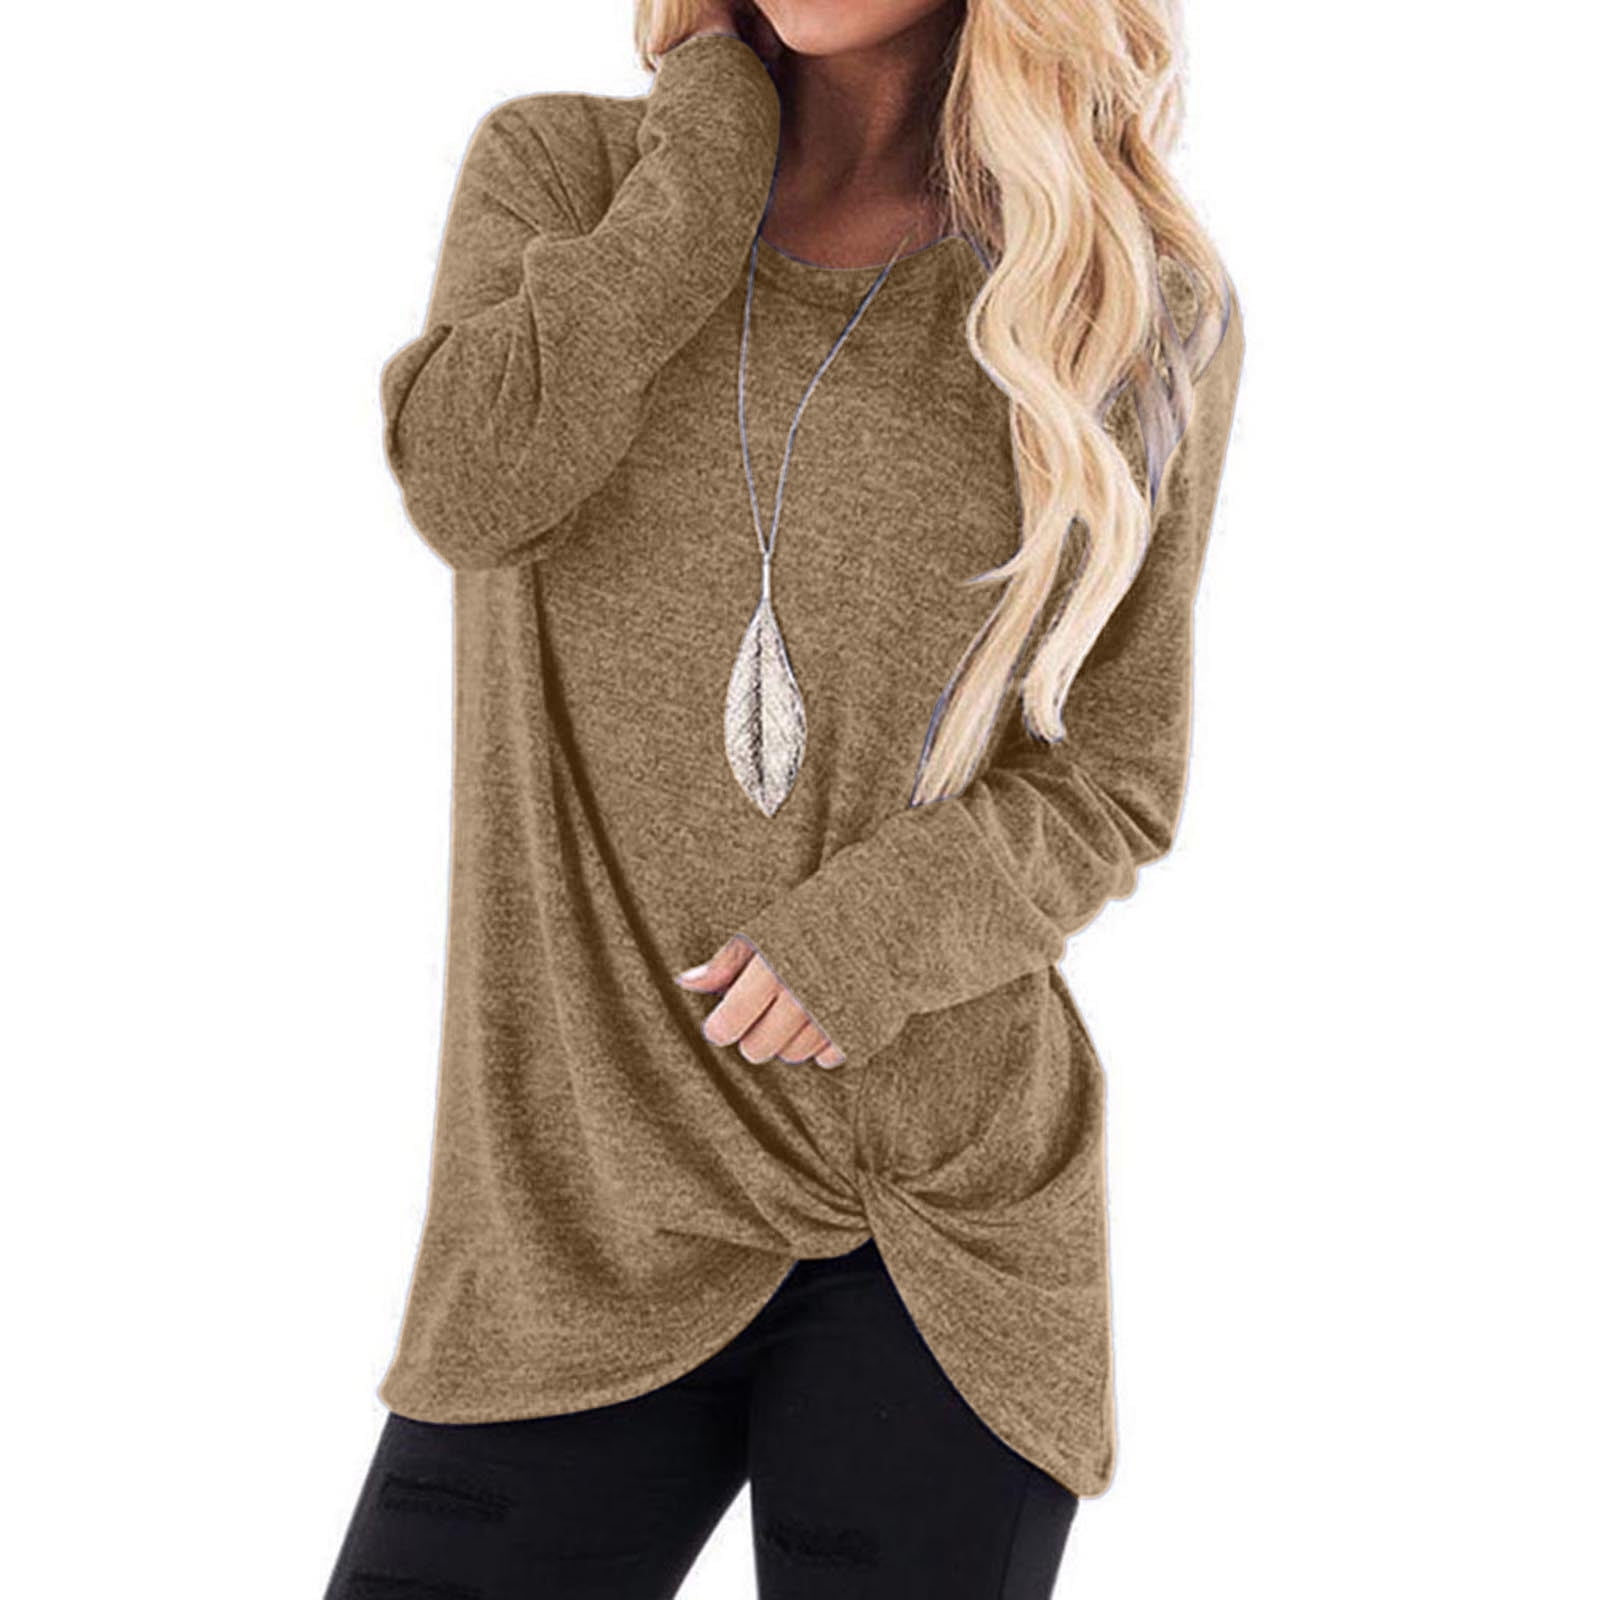 Women Long Sleeve ONeck Casual Solid Twist T-Shirt Casual Basic shirtBlouse Tops 